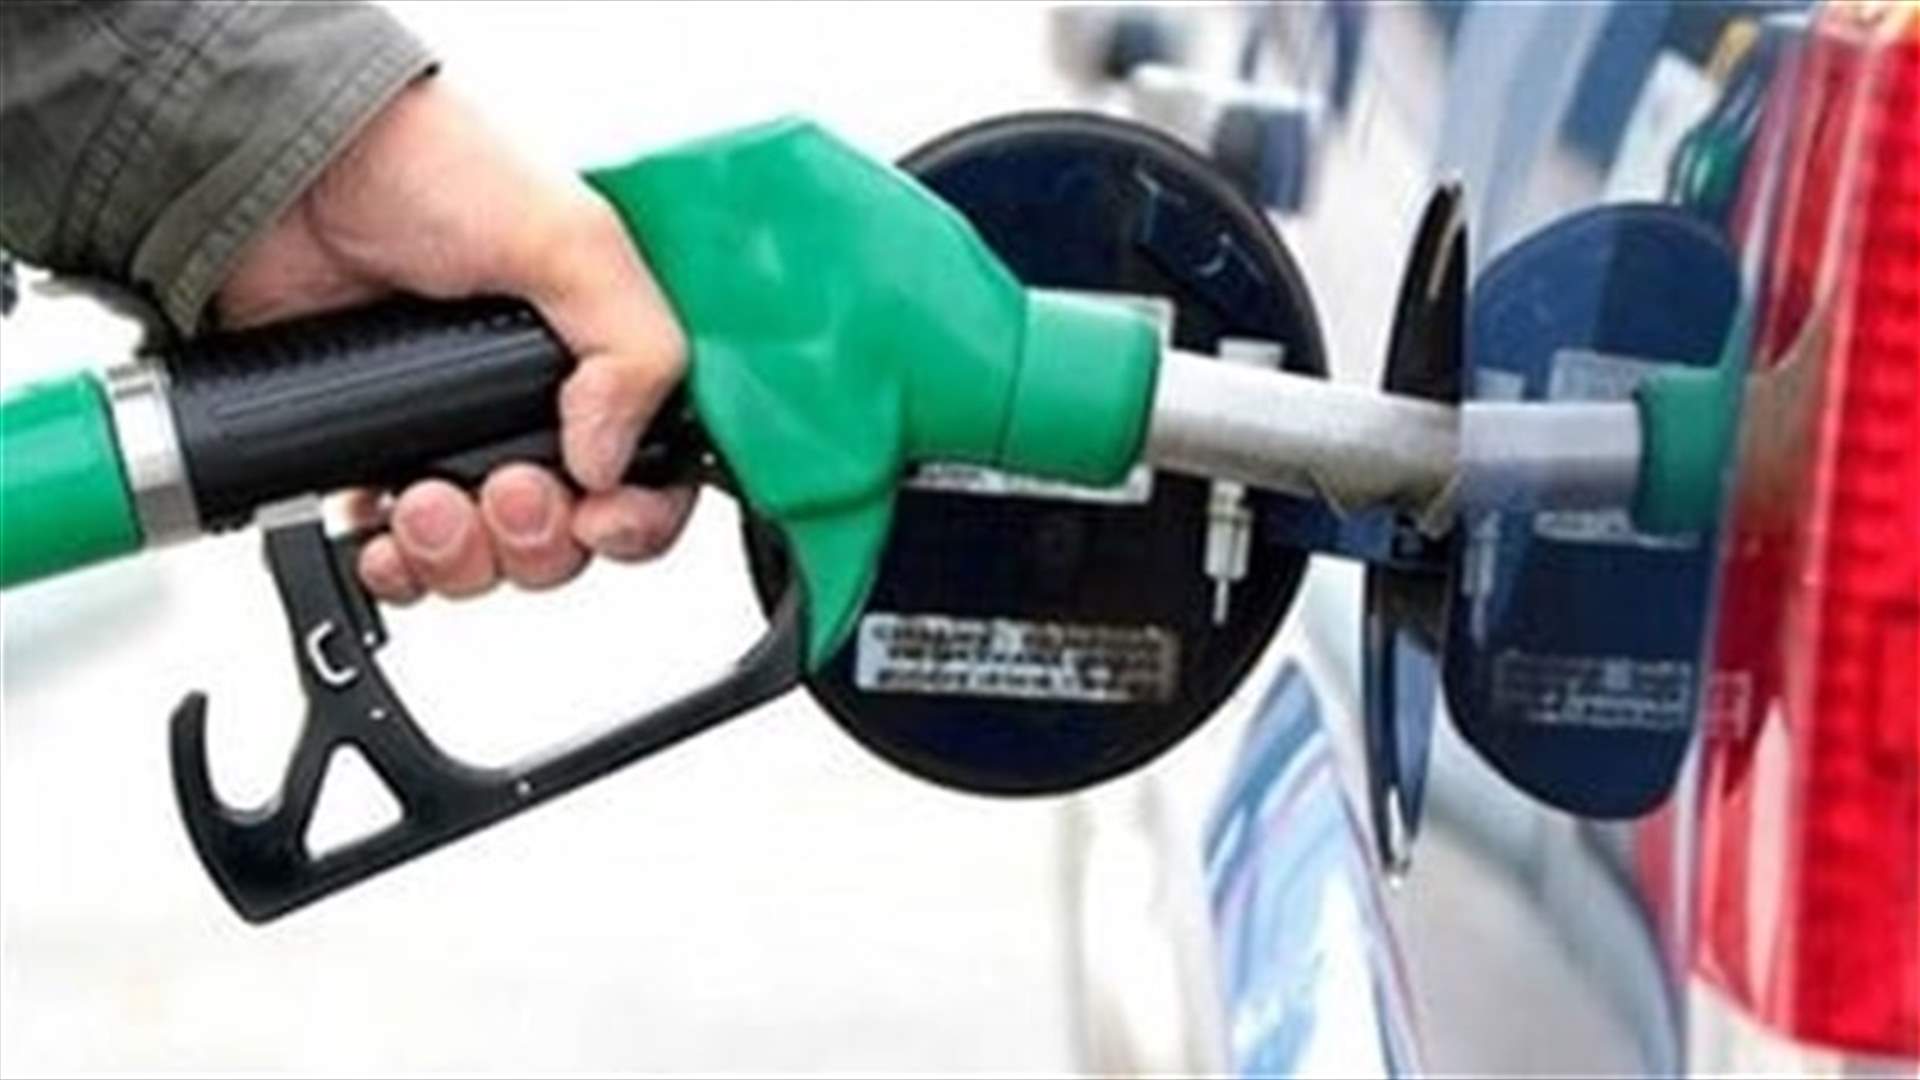 Price of 98 octane fuel increases 37000 LBP